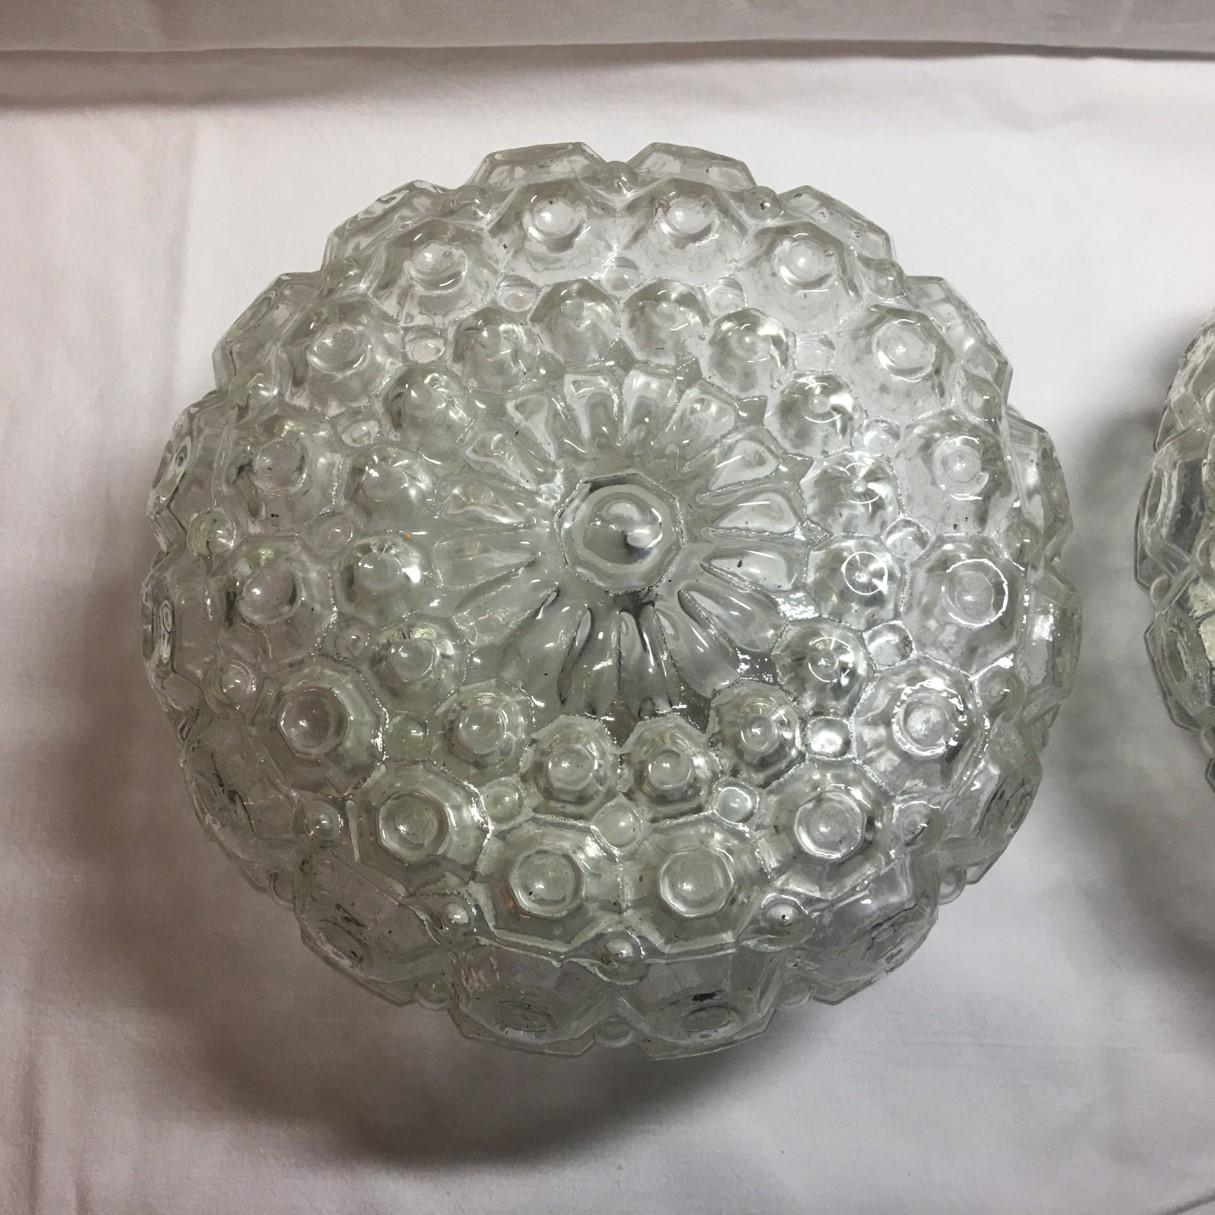 A lovely pair of round 1960s pimples glass flush mount or sconces. The pimple glass gives these a great bubble glass effect. Each fixture requires one European E26 / E27 Edison bulbs, each bulb up to 40 watts. Rewired to meet U.S. standards.